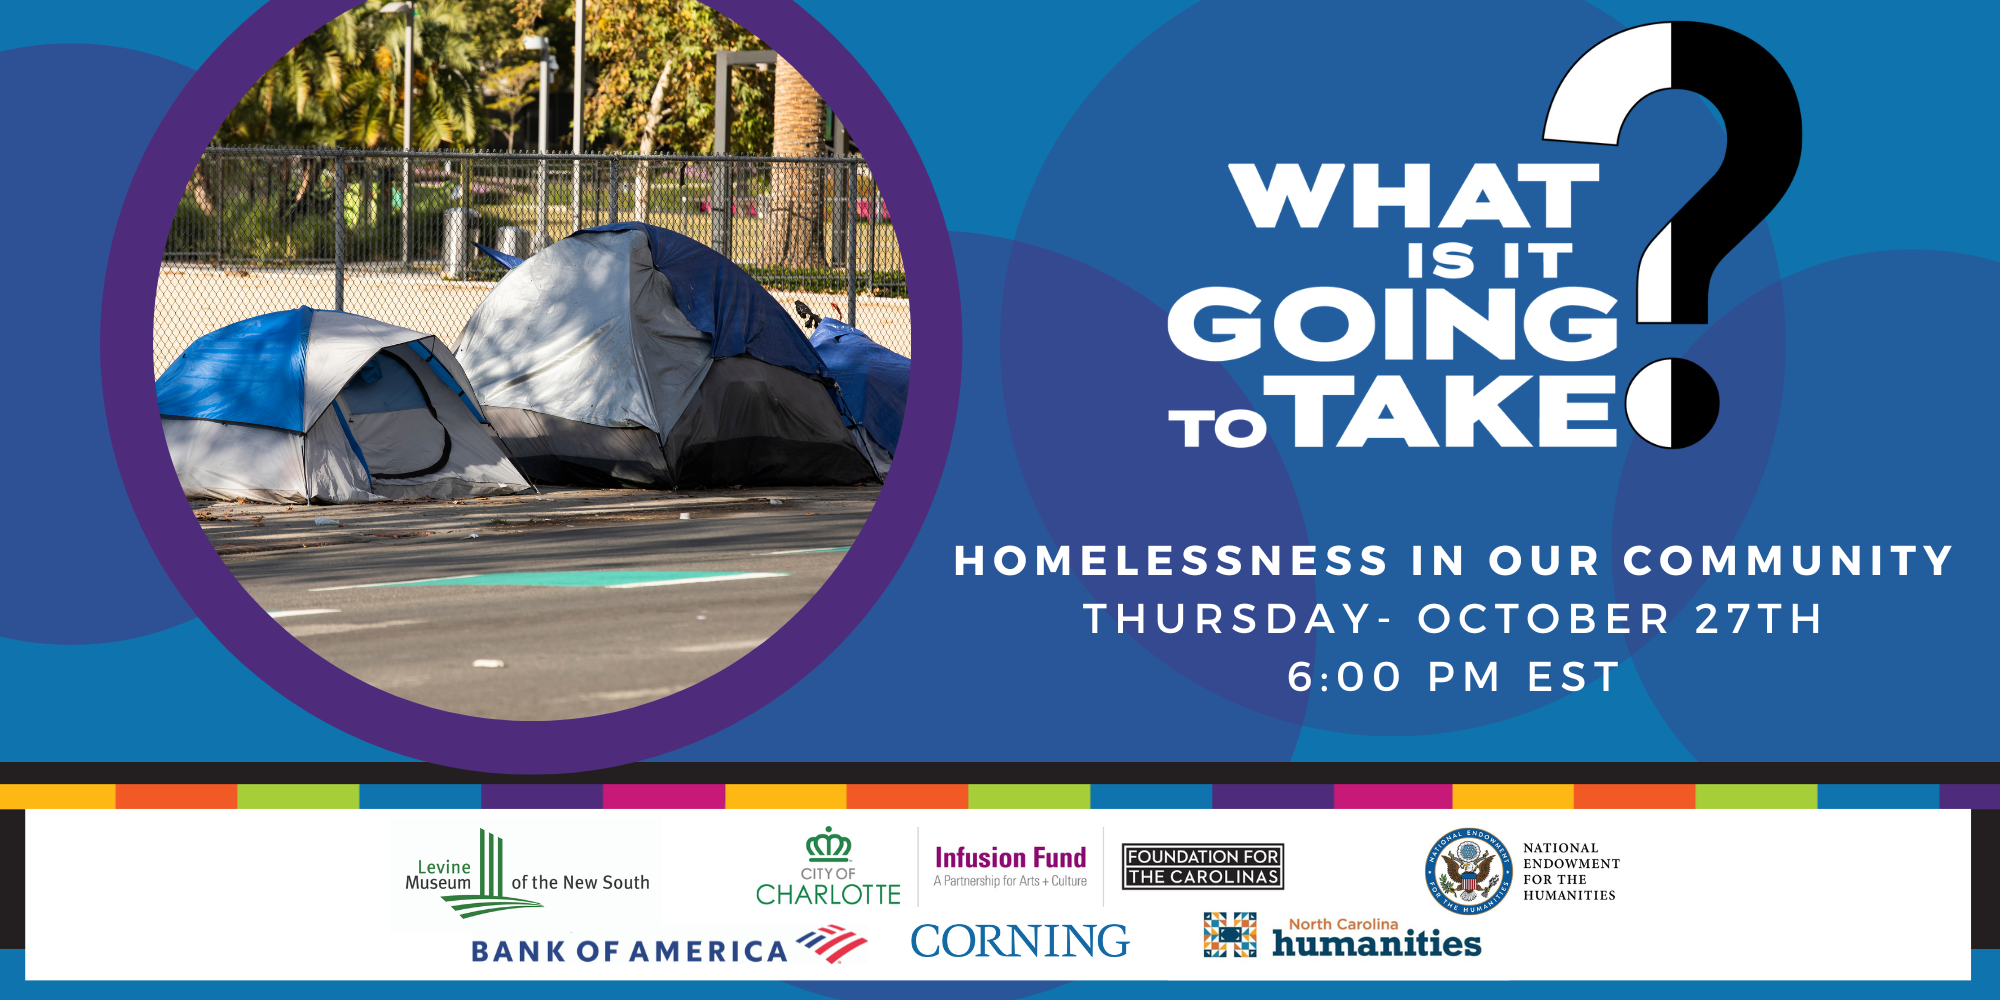 Levine Museum of the New South What Is It Going To Take? Homelessness in Our Community Event Image